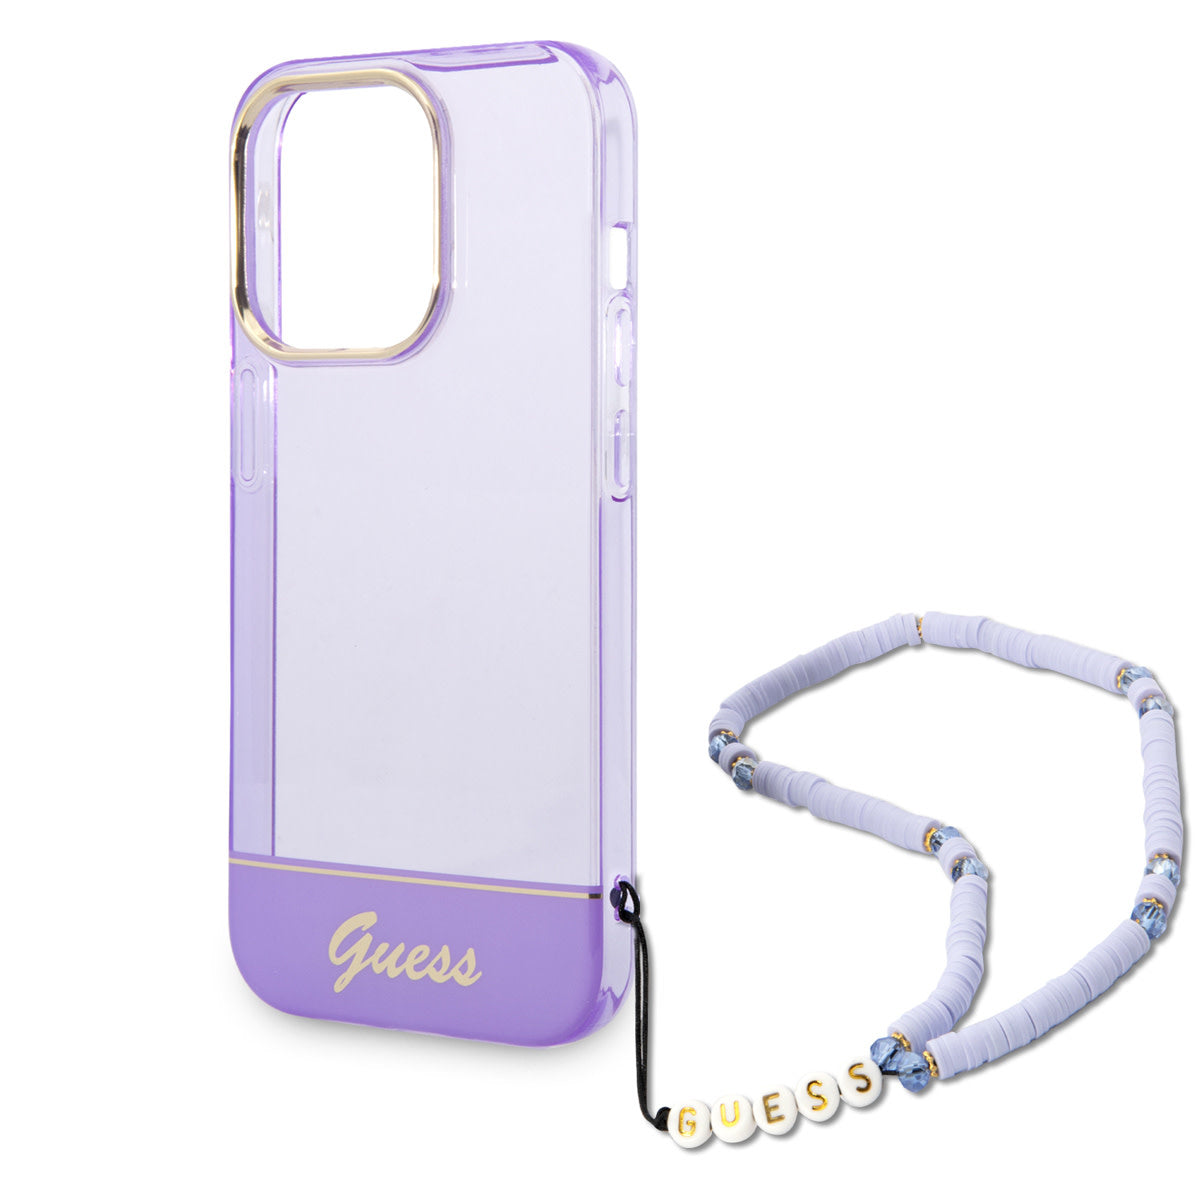 Guess iPhone 14 Pro Max Backcover - met koord - Transparant Paars